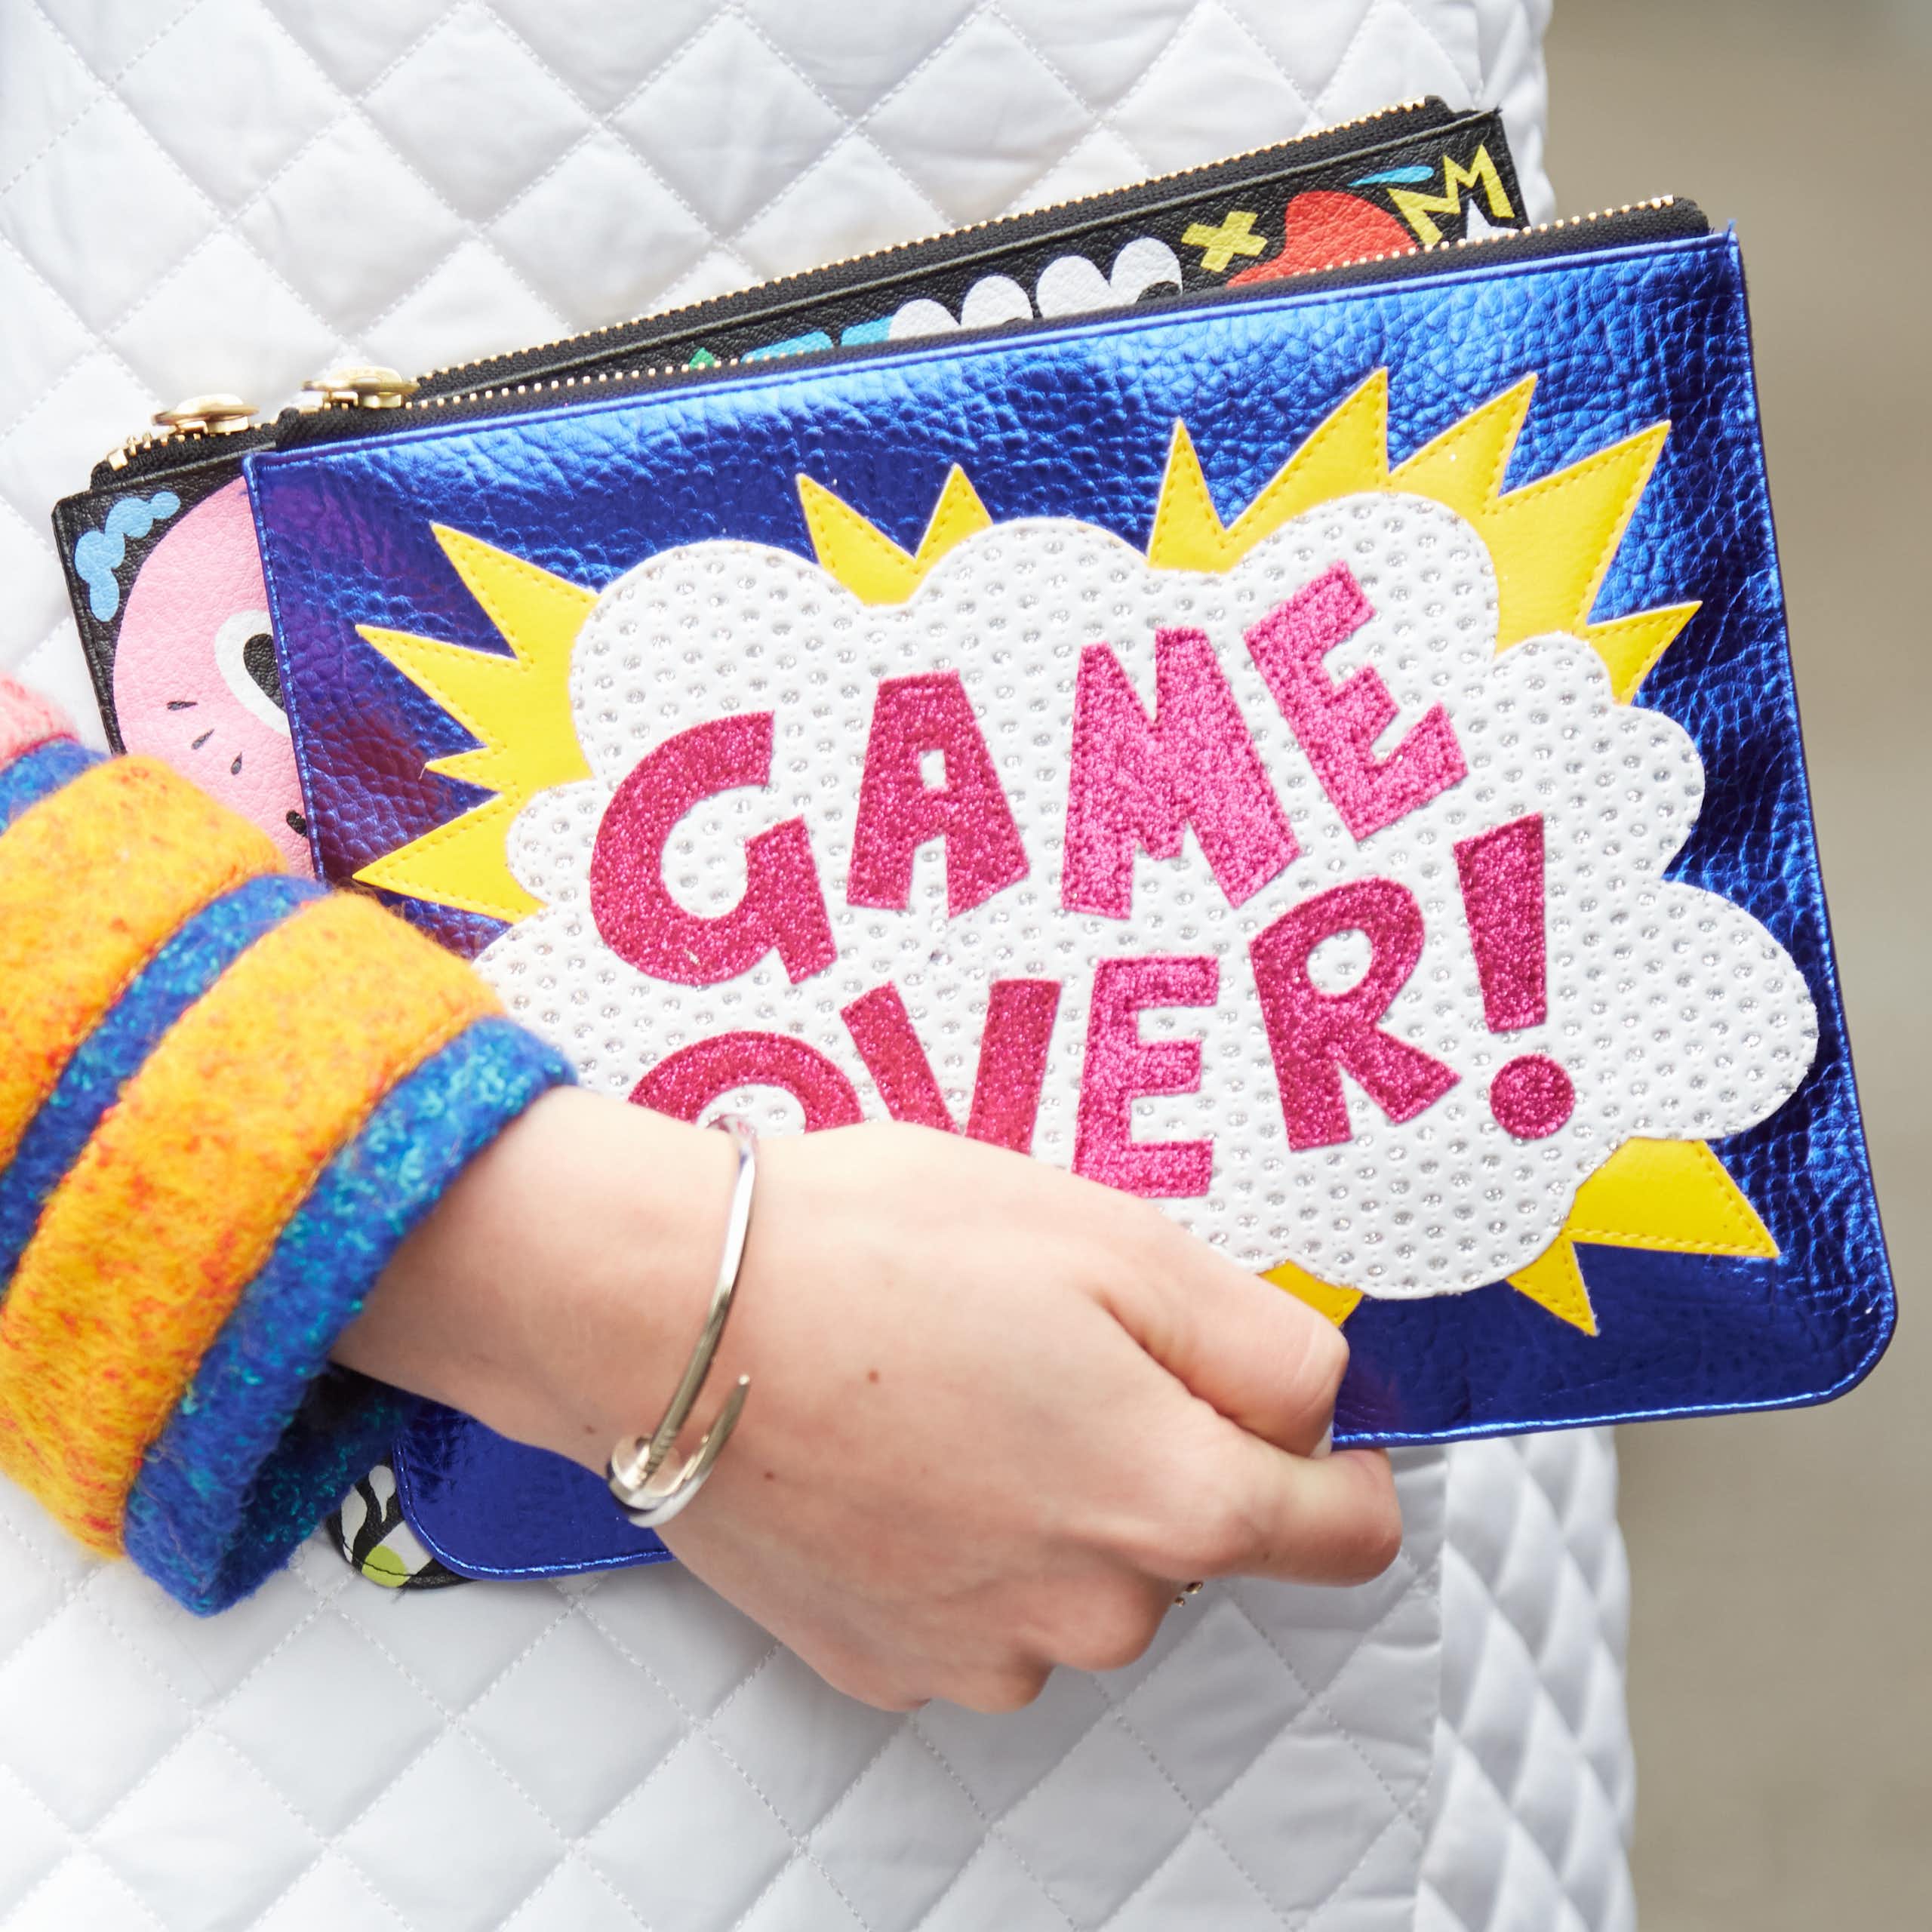 A woman's hand holding a clutch bag that says "GAME OVER!"